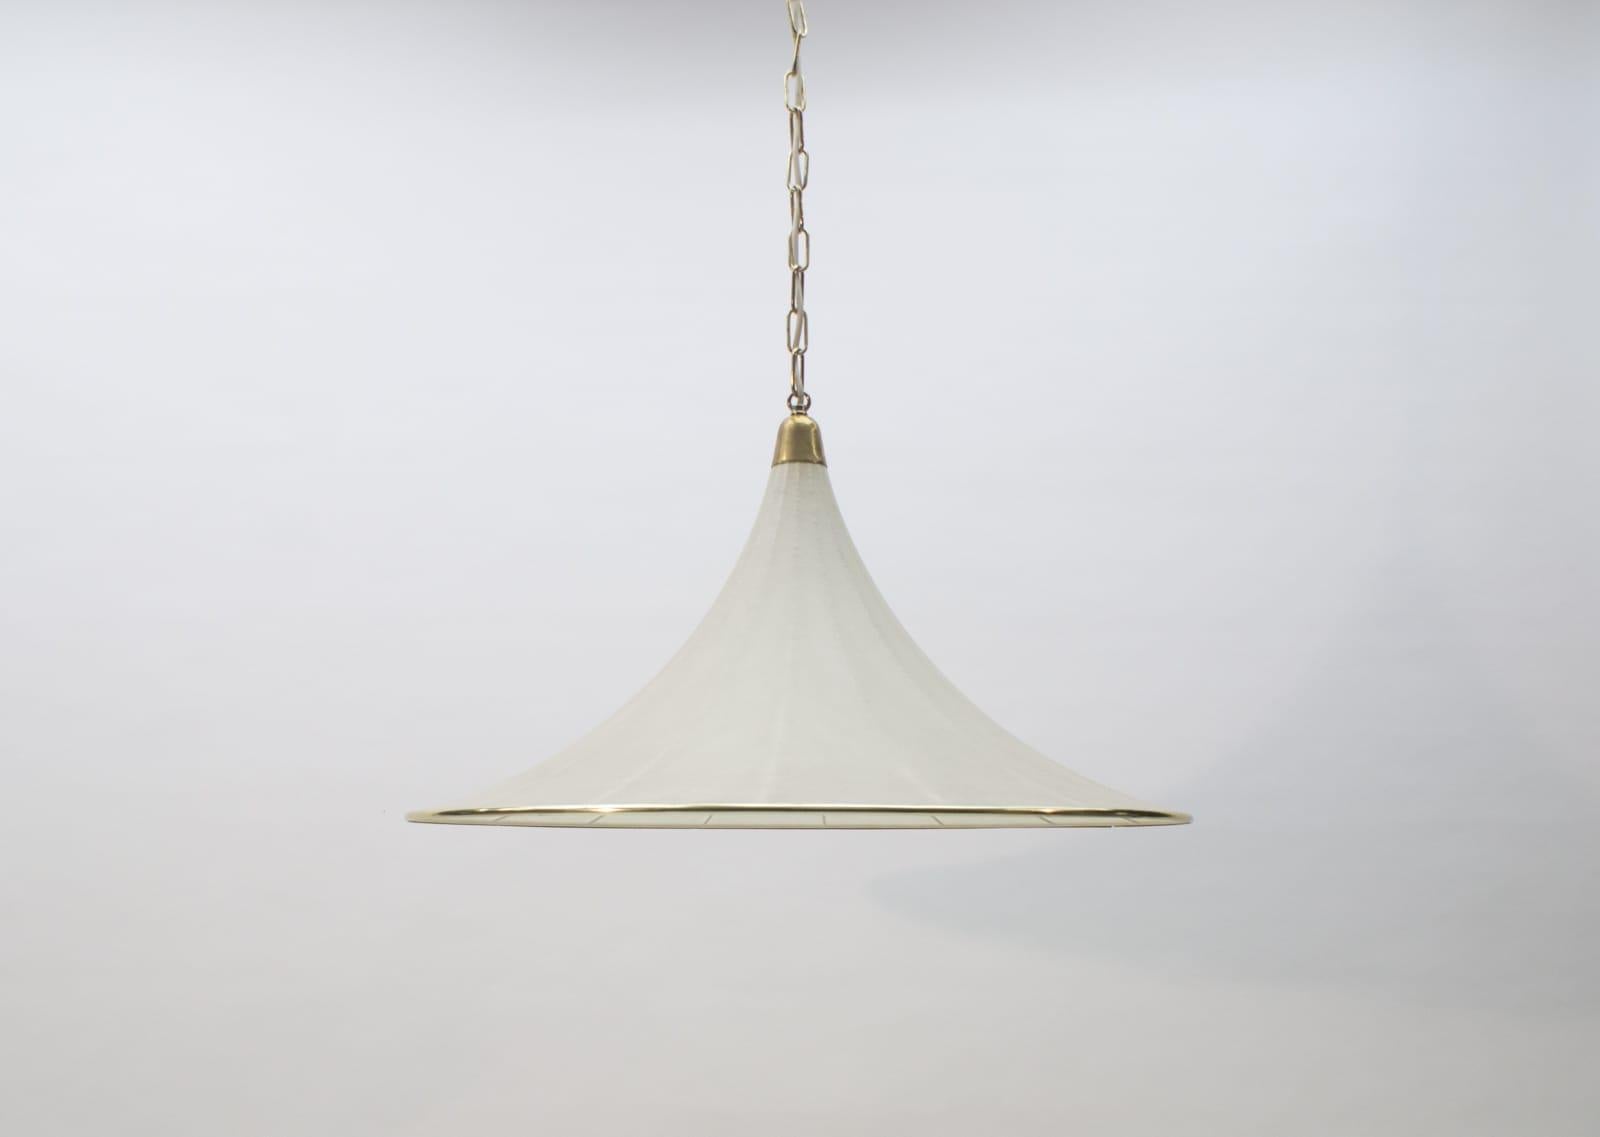 Very large (71cm in diameter) Cocoon lamp from the 1970s. Very impressive. Very nice condition. Socket e27. Dimmable.